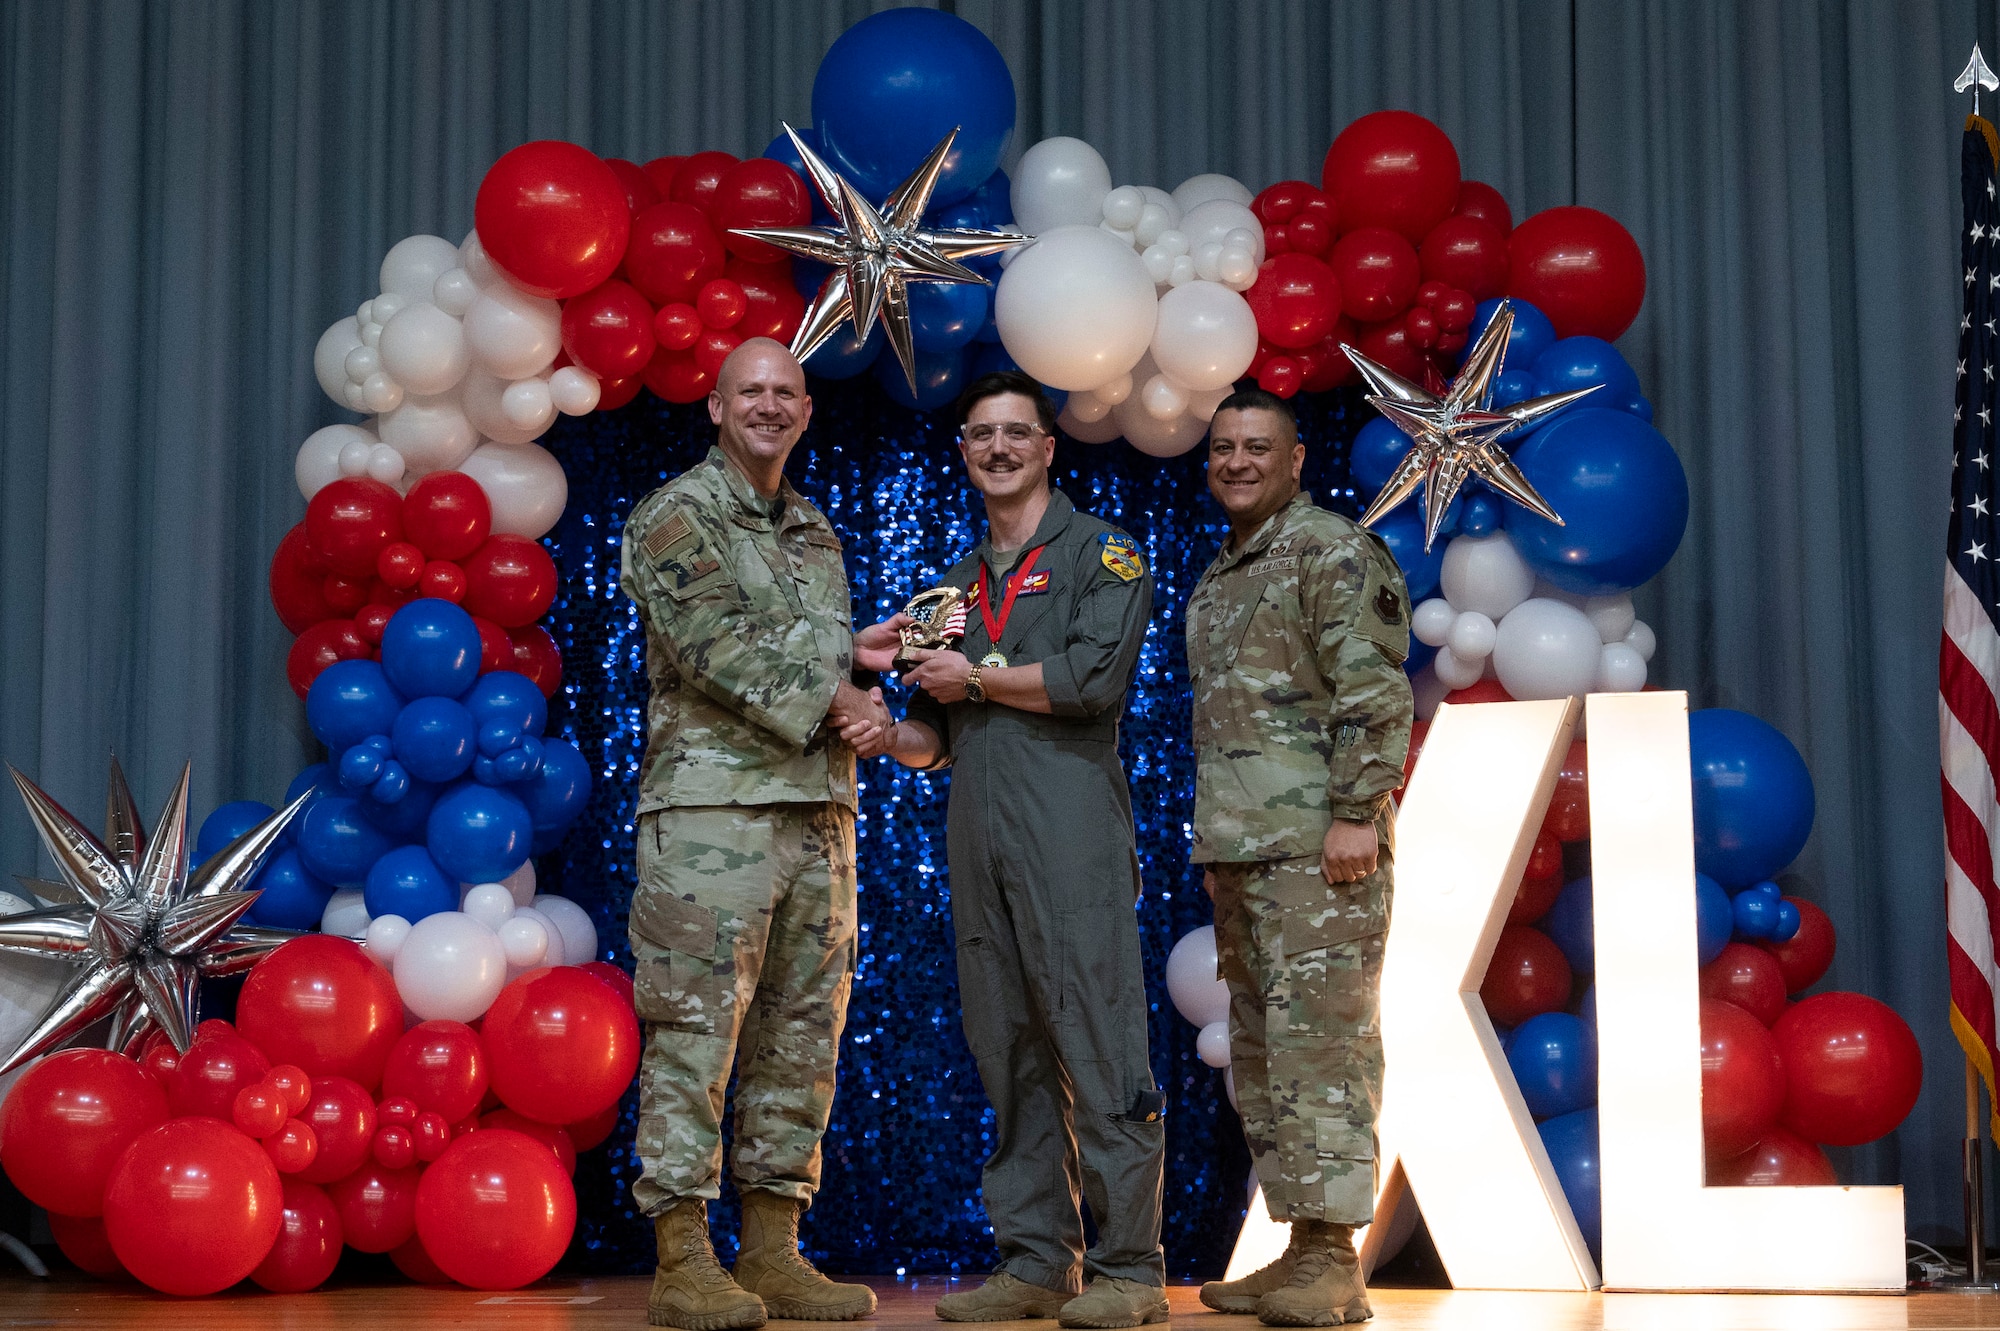 U.S. Air Force Col. Kevin Davidson, 47th Flying Training Wing (FTW) commander, and Chief Master Sgt. Lester Largaespada, 47th FTW command chief, present Maj. Stephen Crump, 47th Operations Group, an award during the 2023 47th FTW Annual Awards Ceremony at Laughlin Air Force Base, Texas, Feb. 2, 2024. These awards recognized the top performers throughout the 47th Flying Training Wing during fiscal year 2023. (U.S. Air Force photo by Senior Airman Kailee Reynolds)